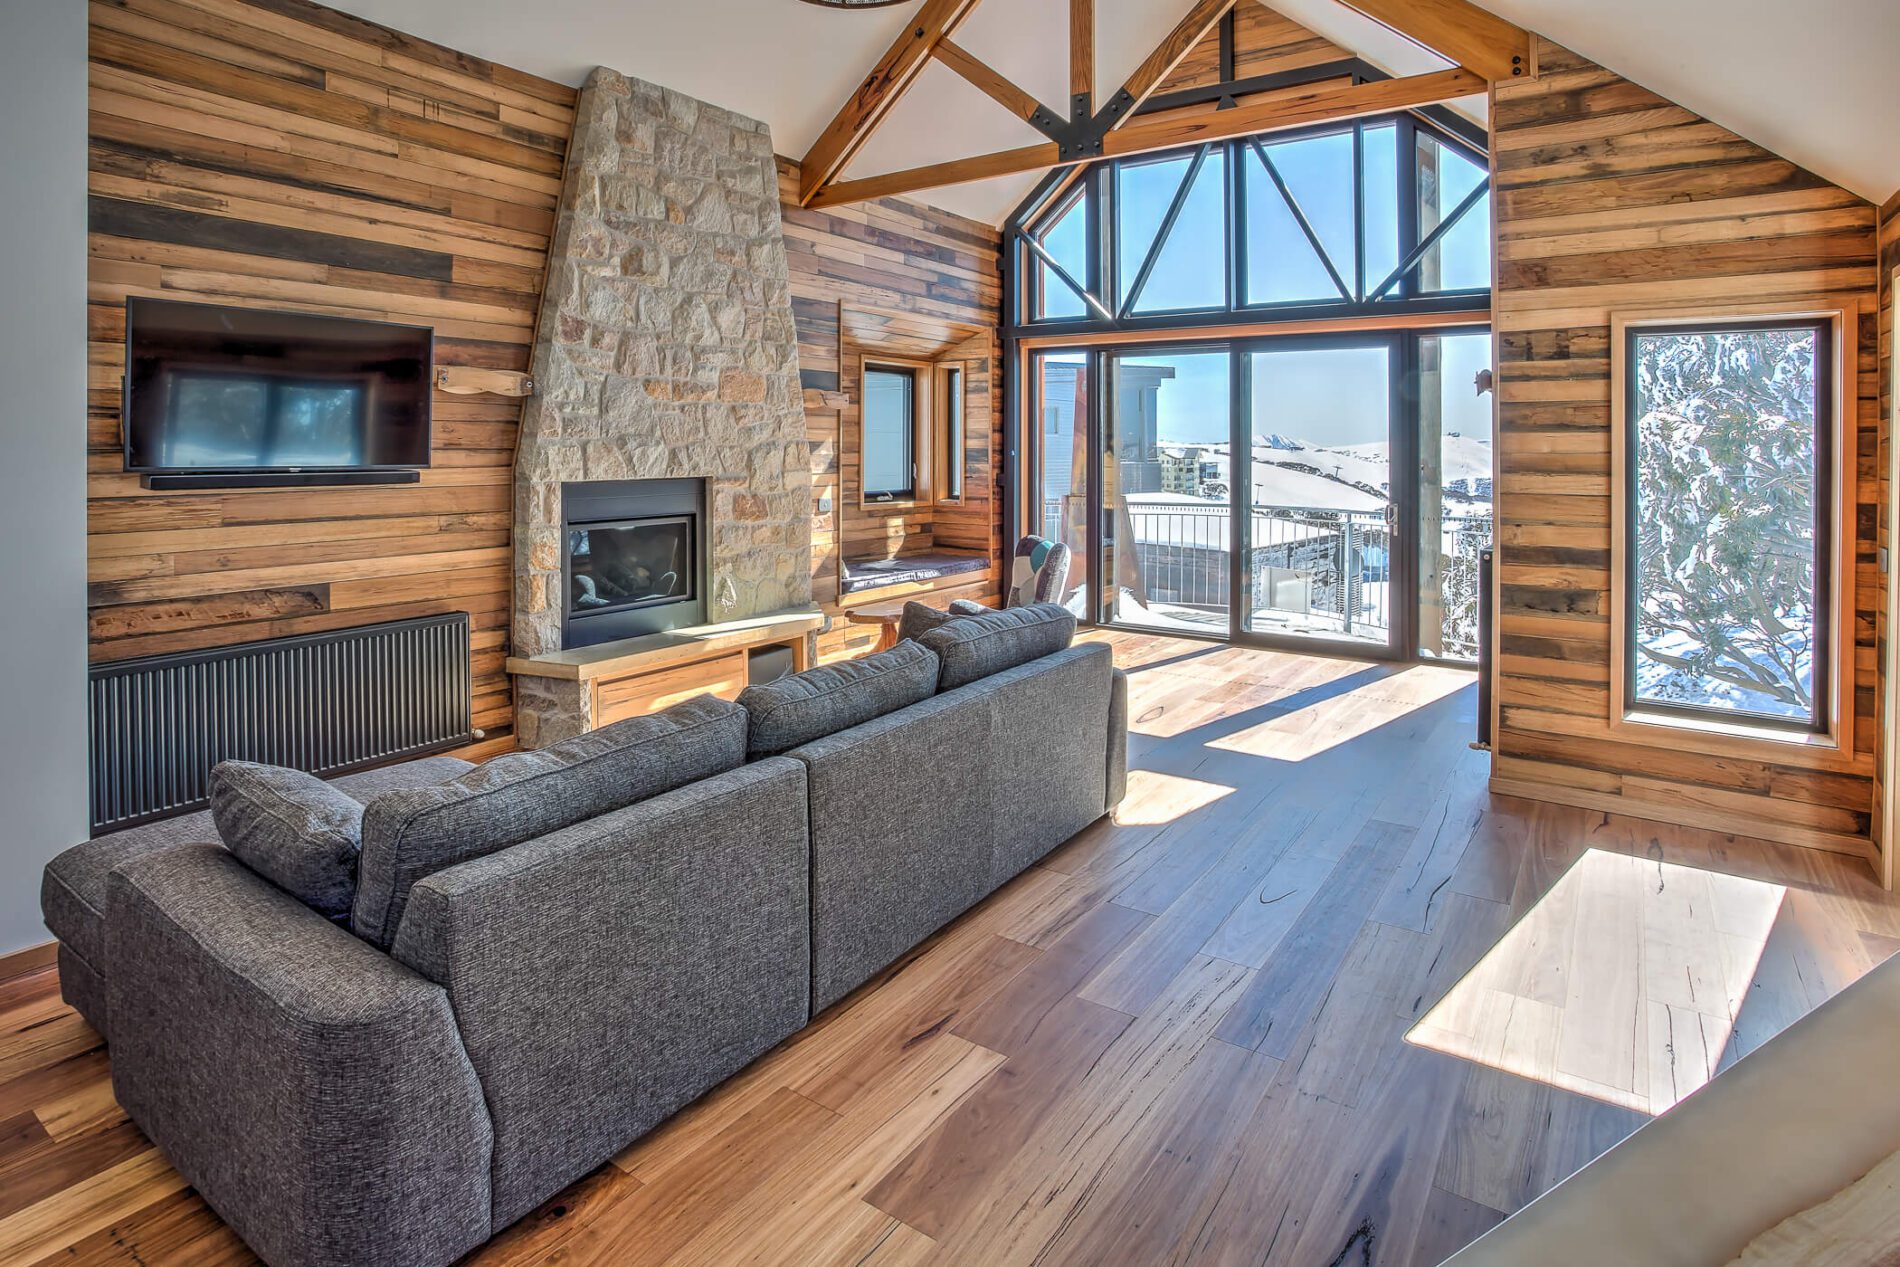 Chalet living room with gas log fire and views of the slopes